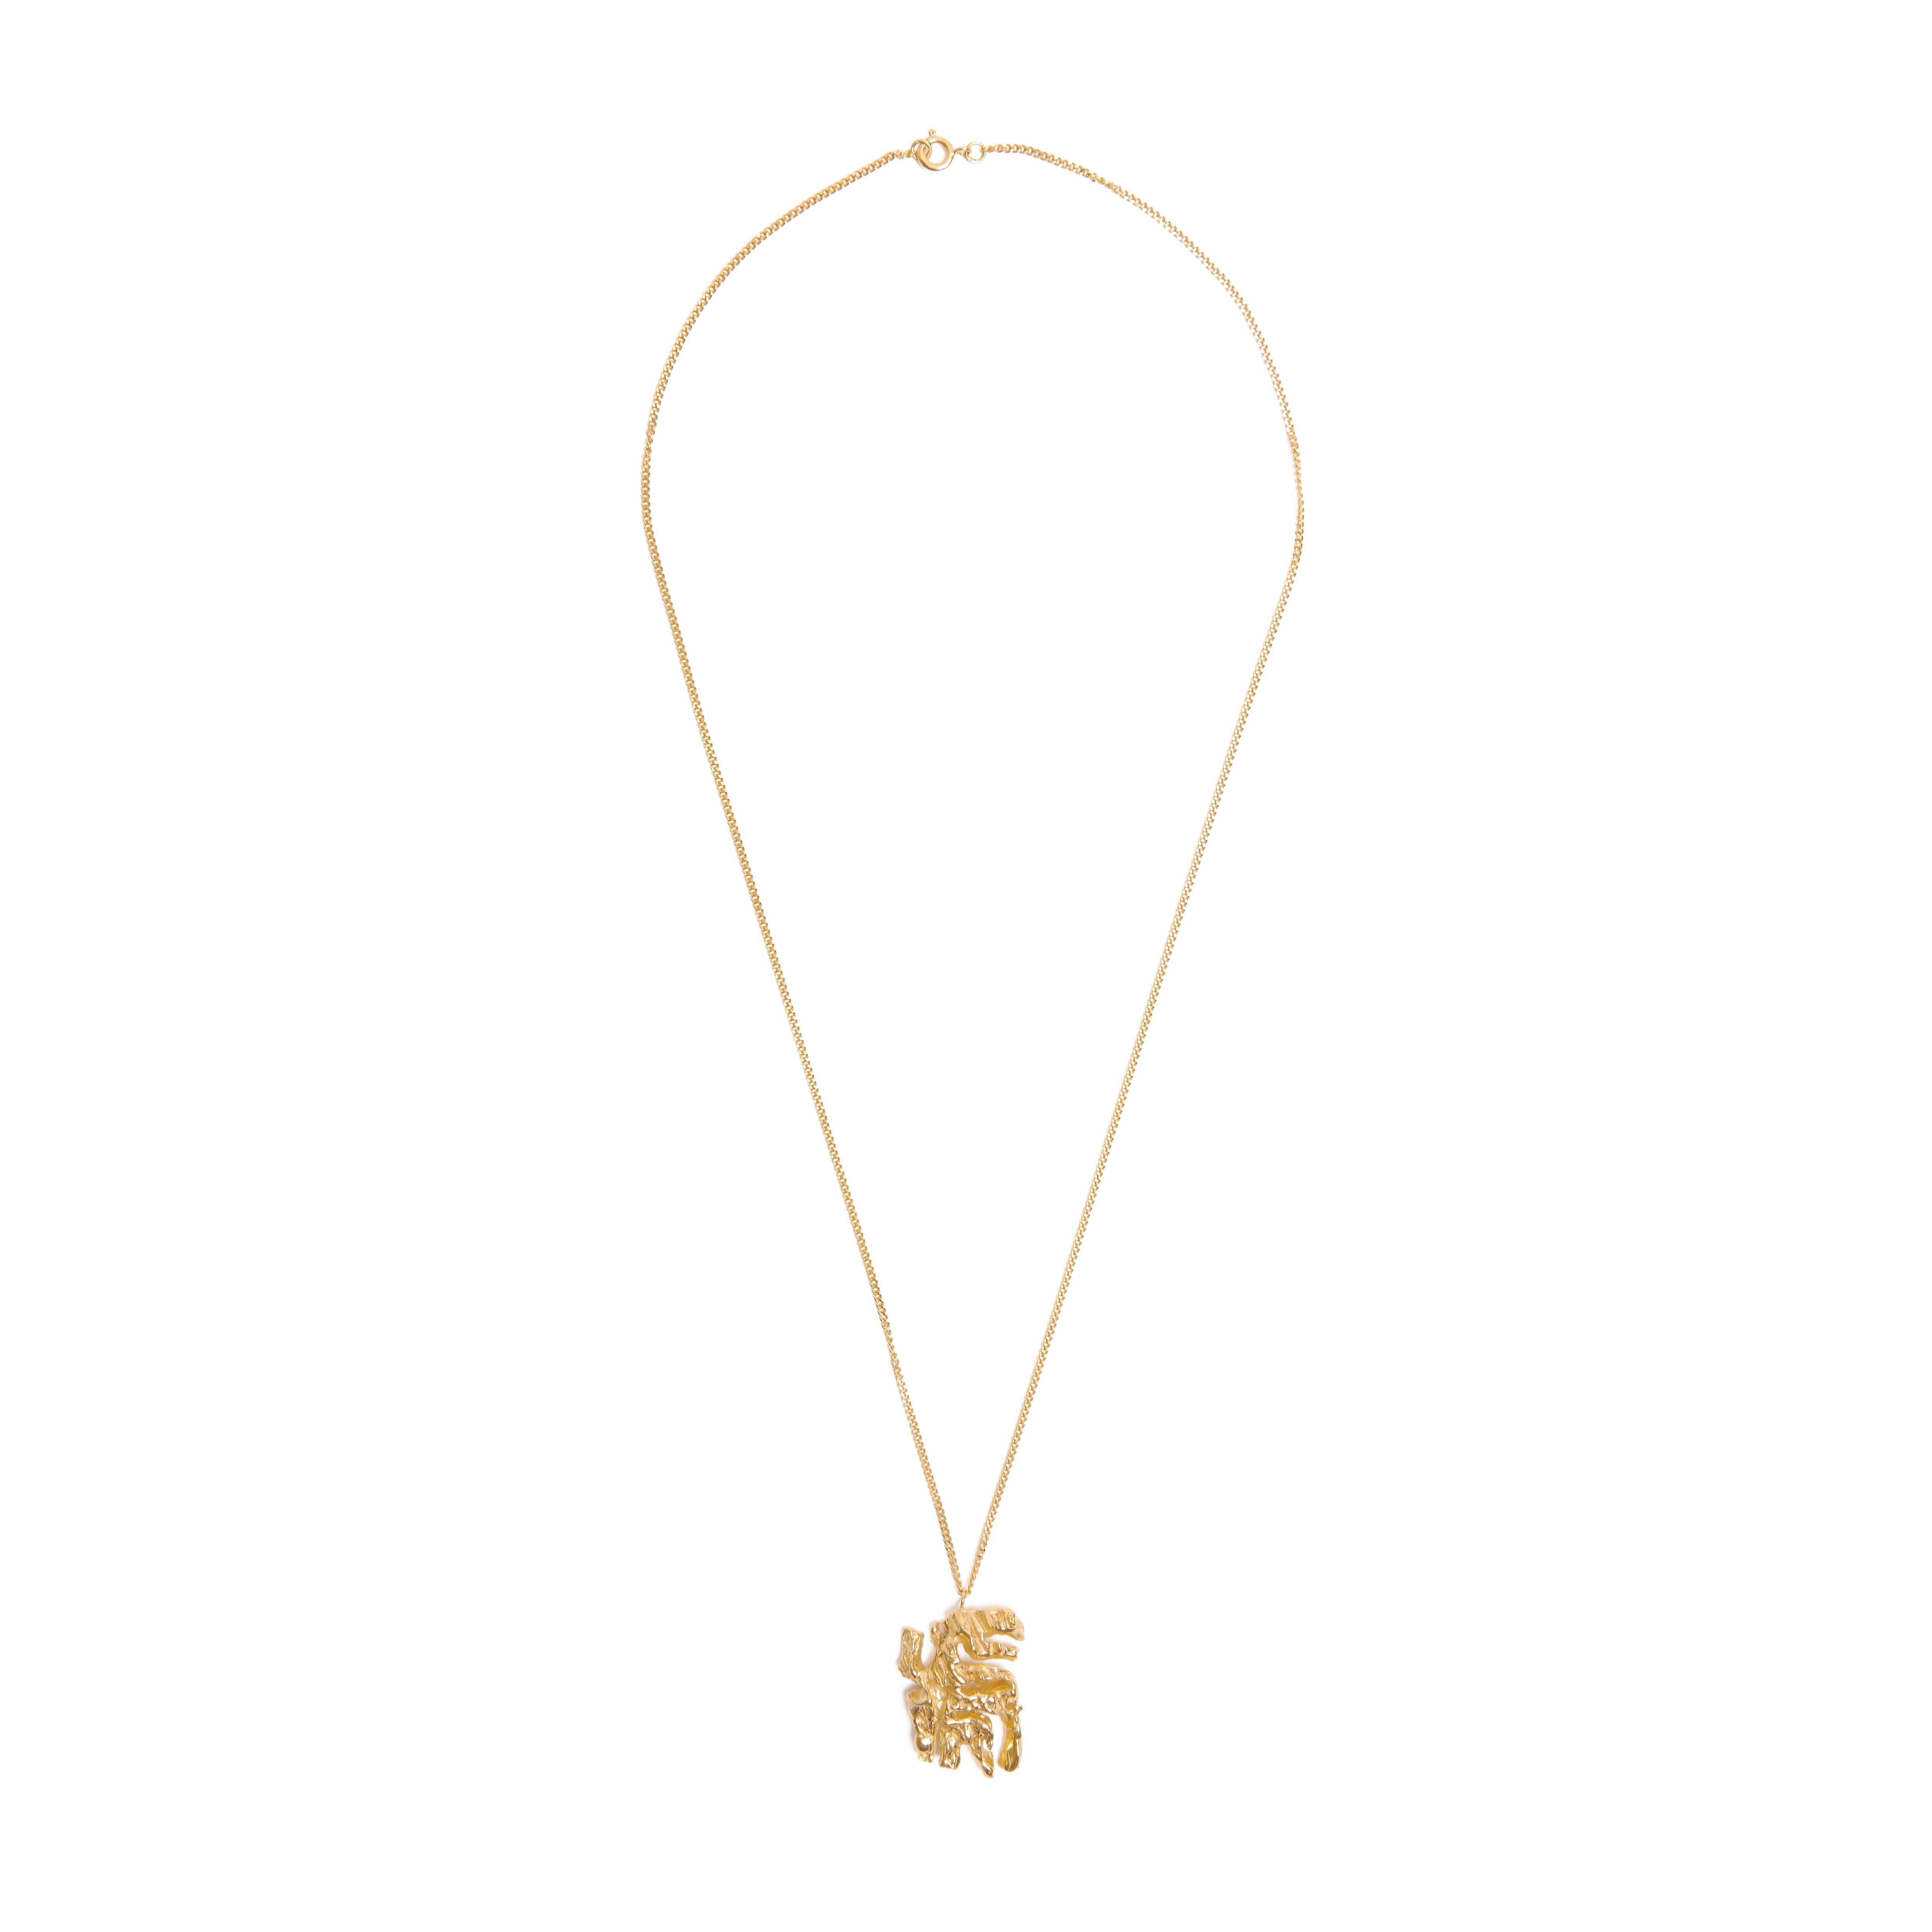 The Chinese zodiac Tiger necklace is influenced by the ancient Chinese calligraphy character of Tiger (Hu 虎), the third of the twelve signs of the Chinese zodiac. Courage, self-assurance, competitiveness, and spontaneity: these are the traits that